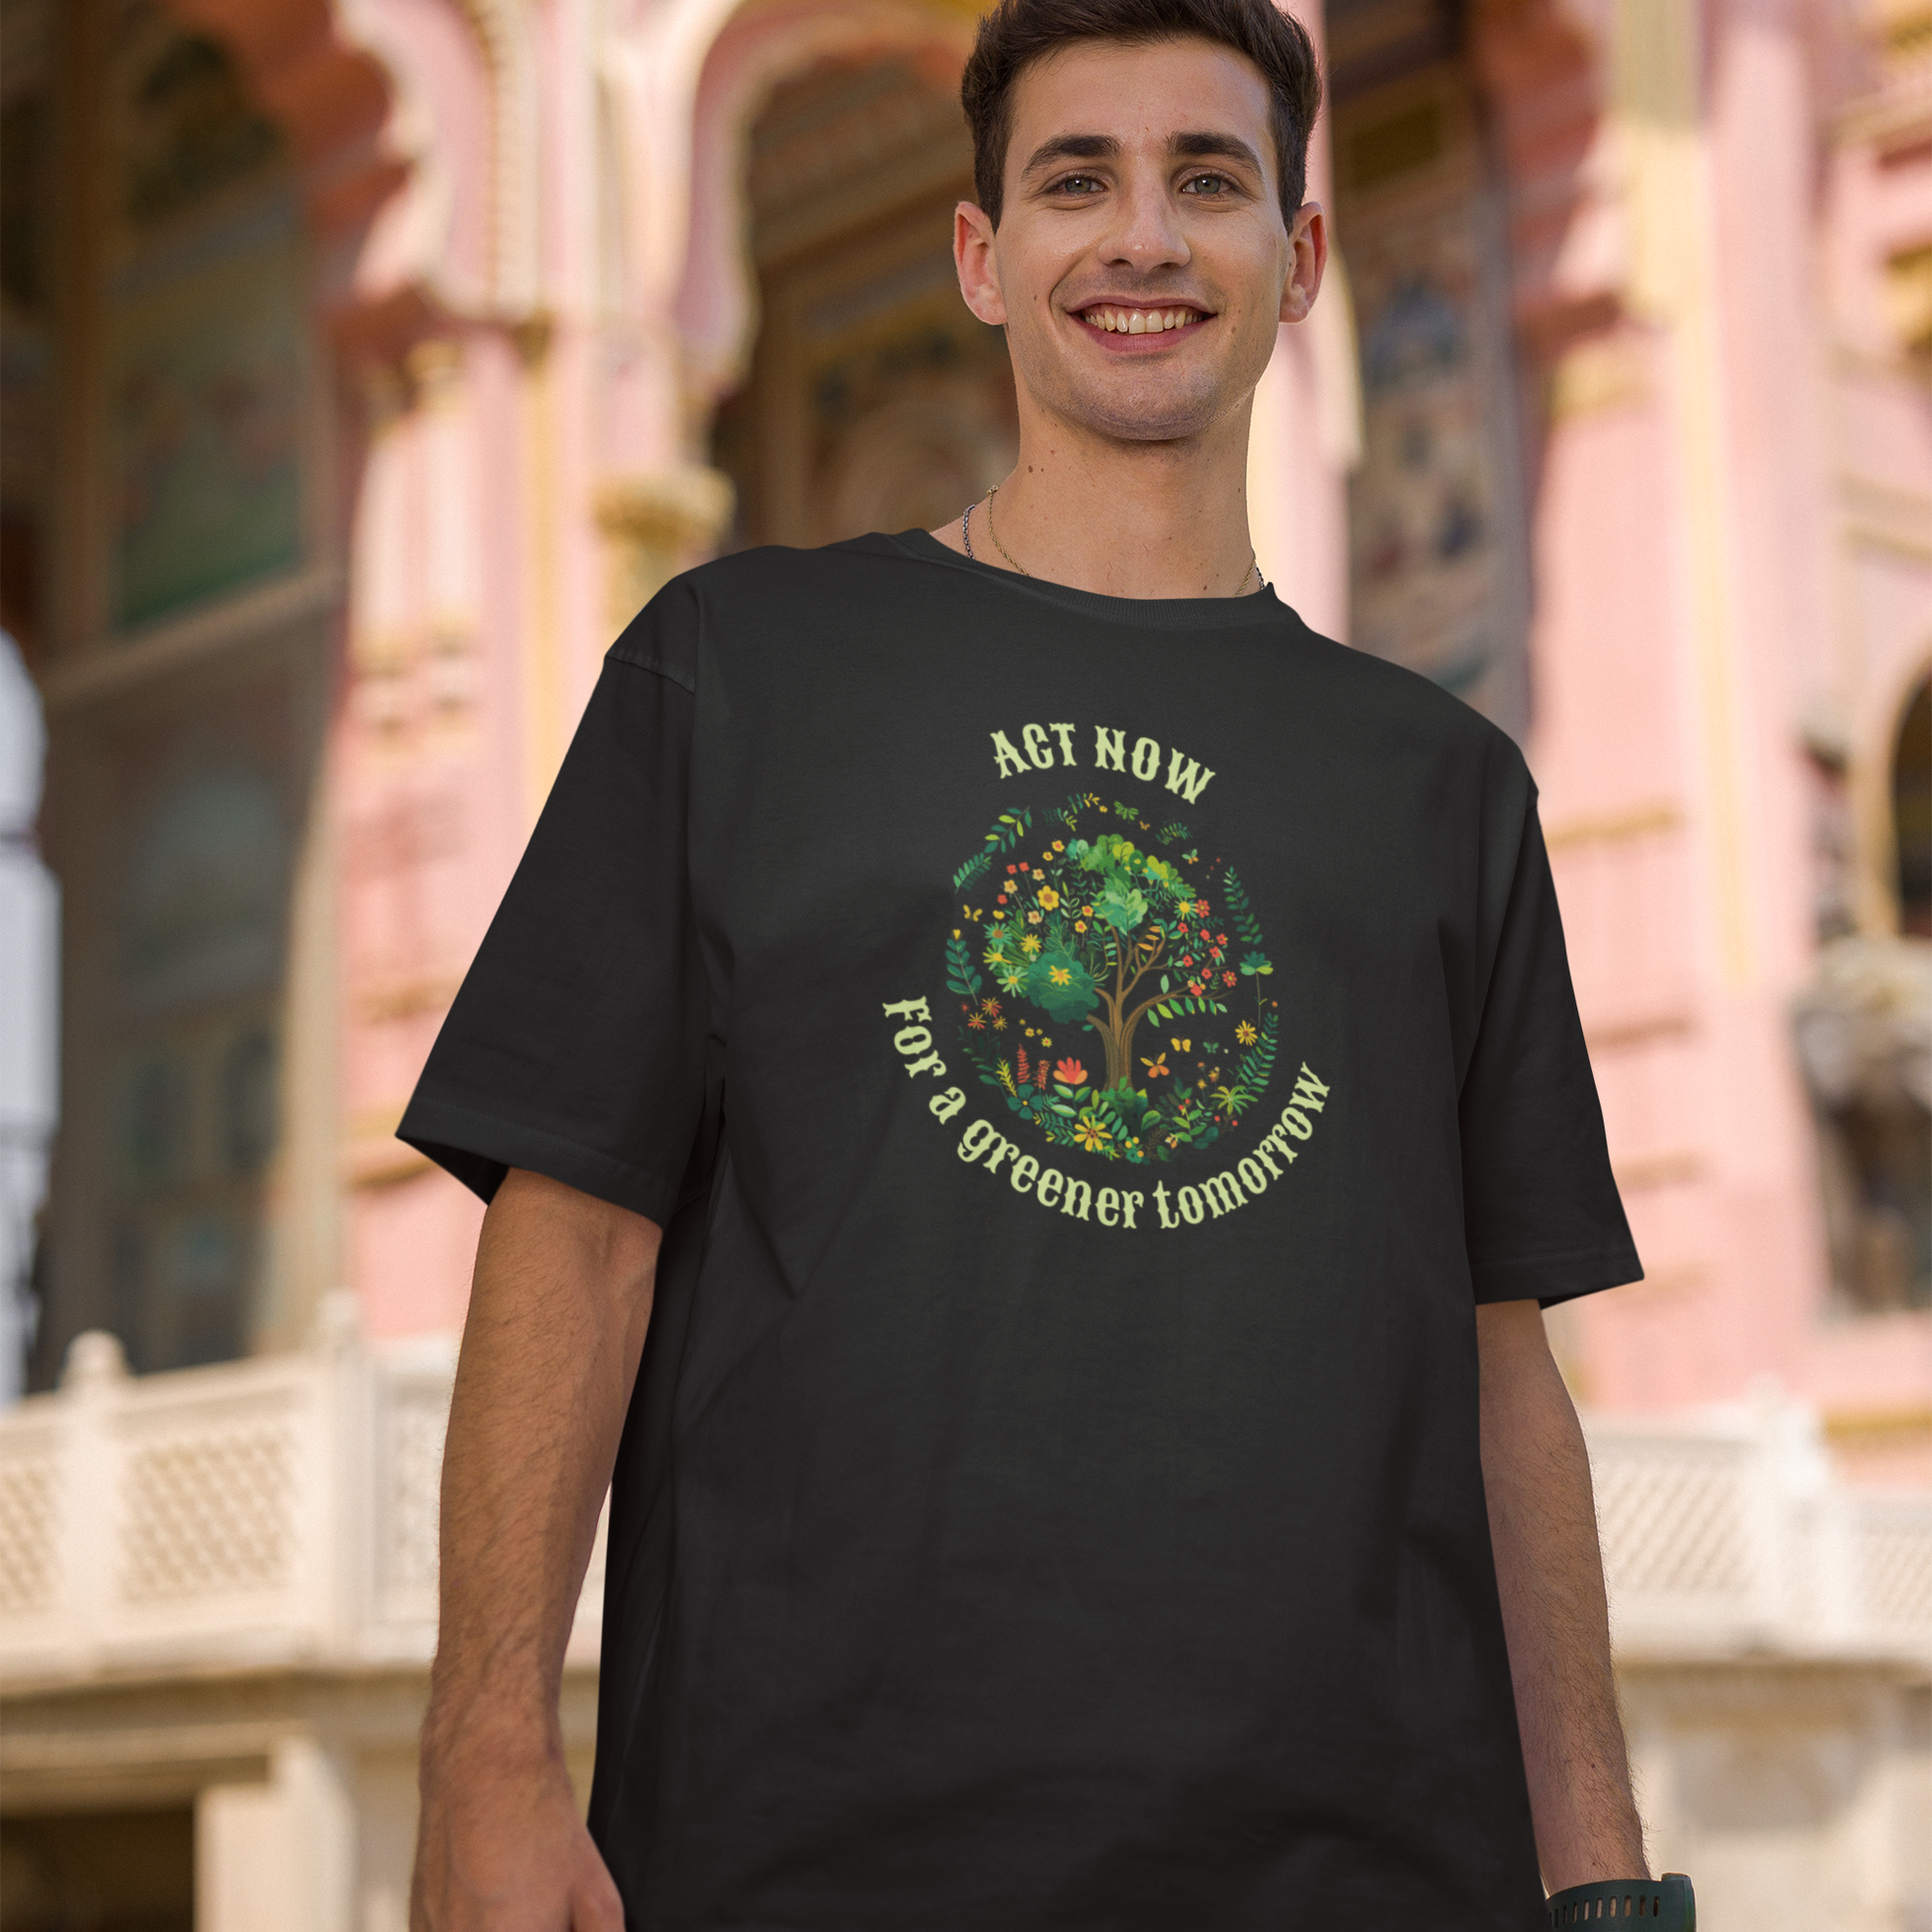 Men's Oversized T-Shirt - "Act Now for a Greener Tomorrow" Environment Day Theme T-Shirt